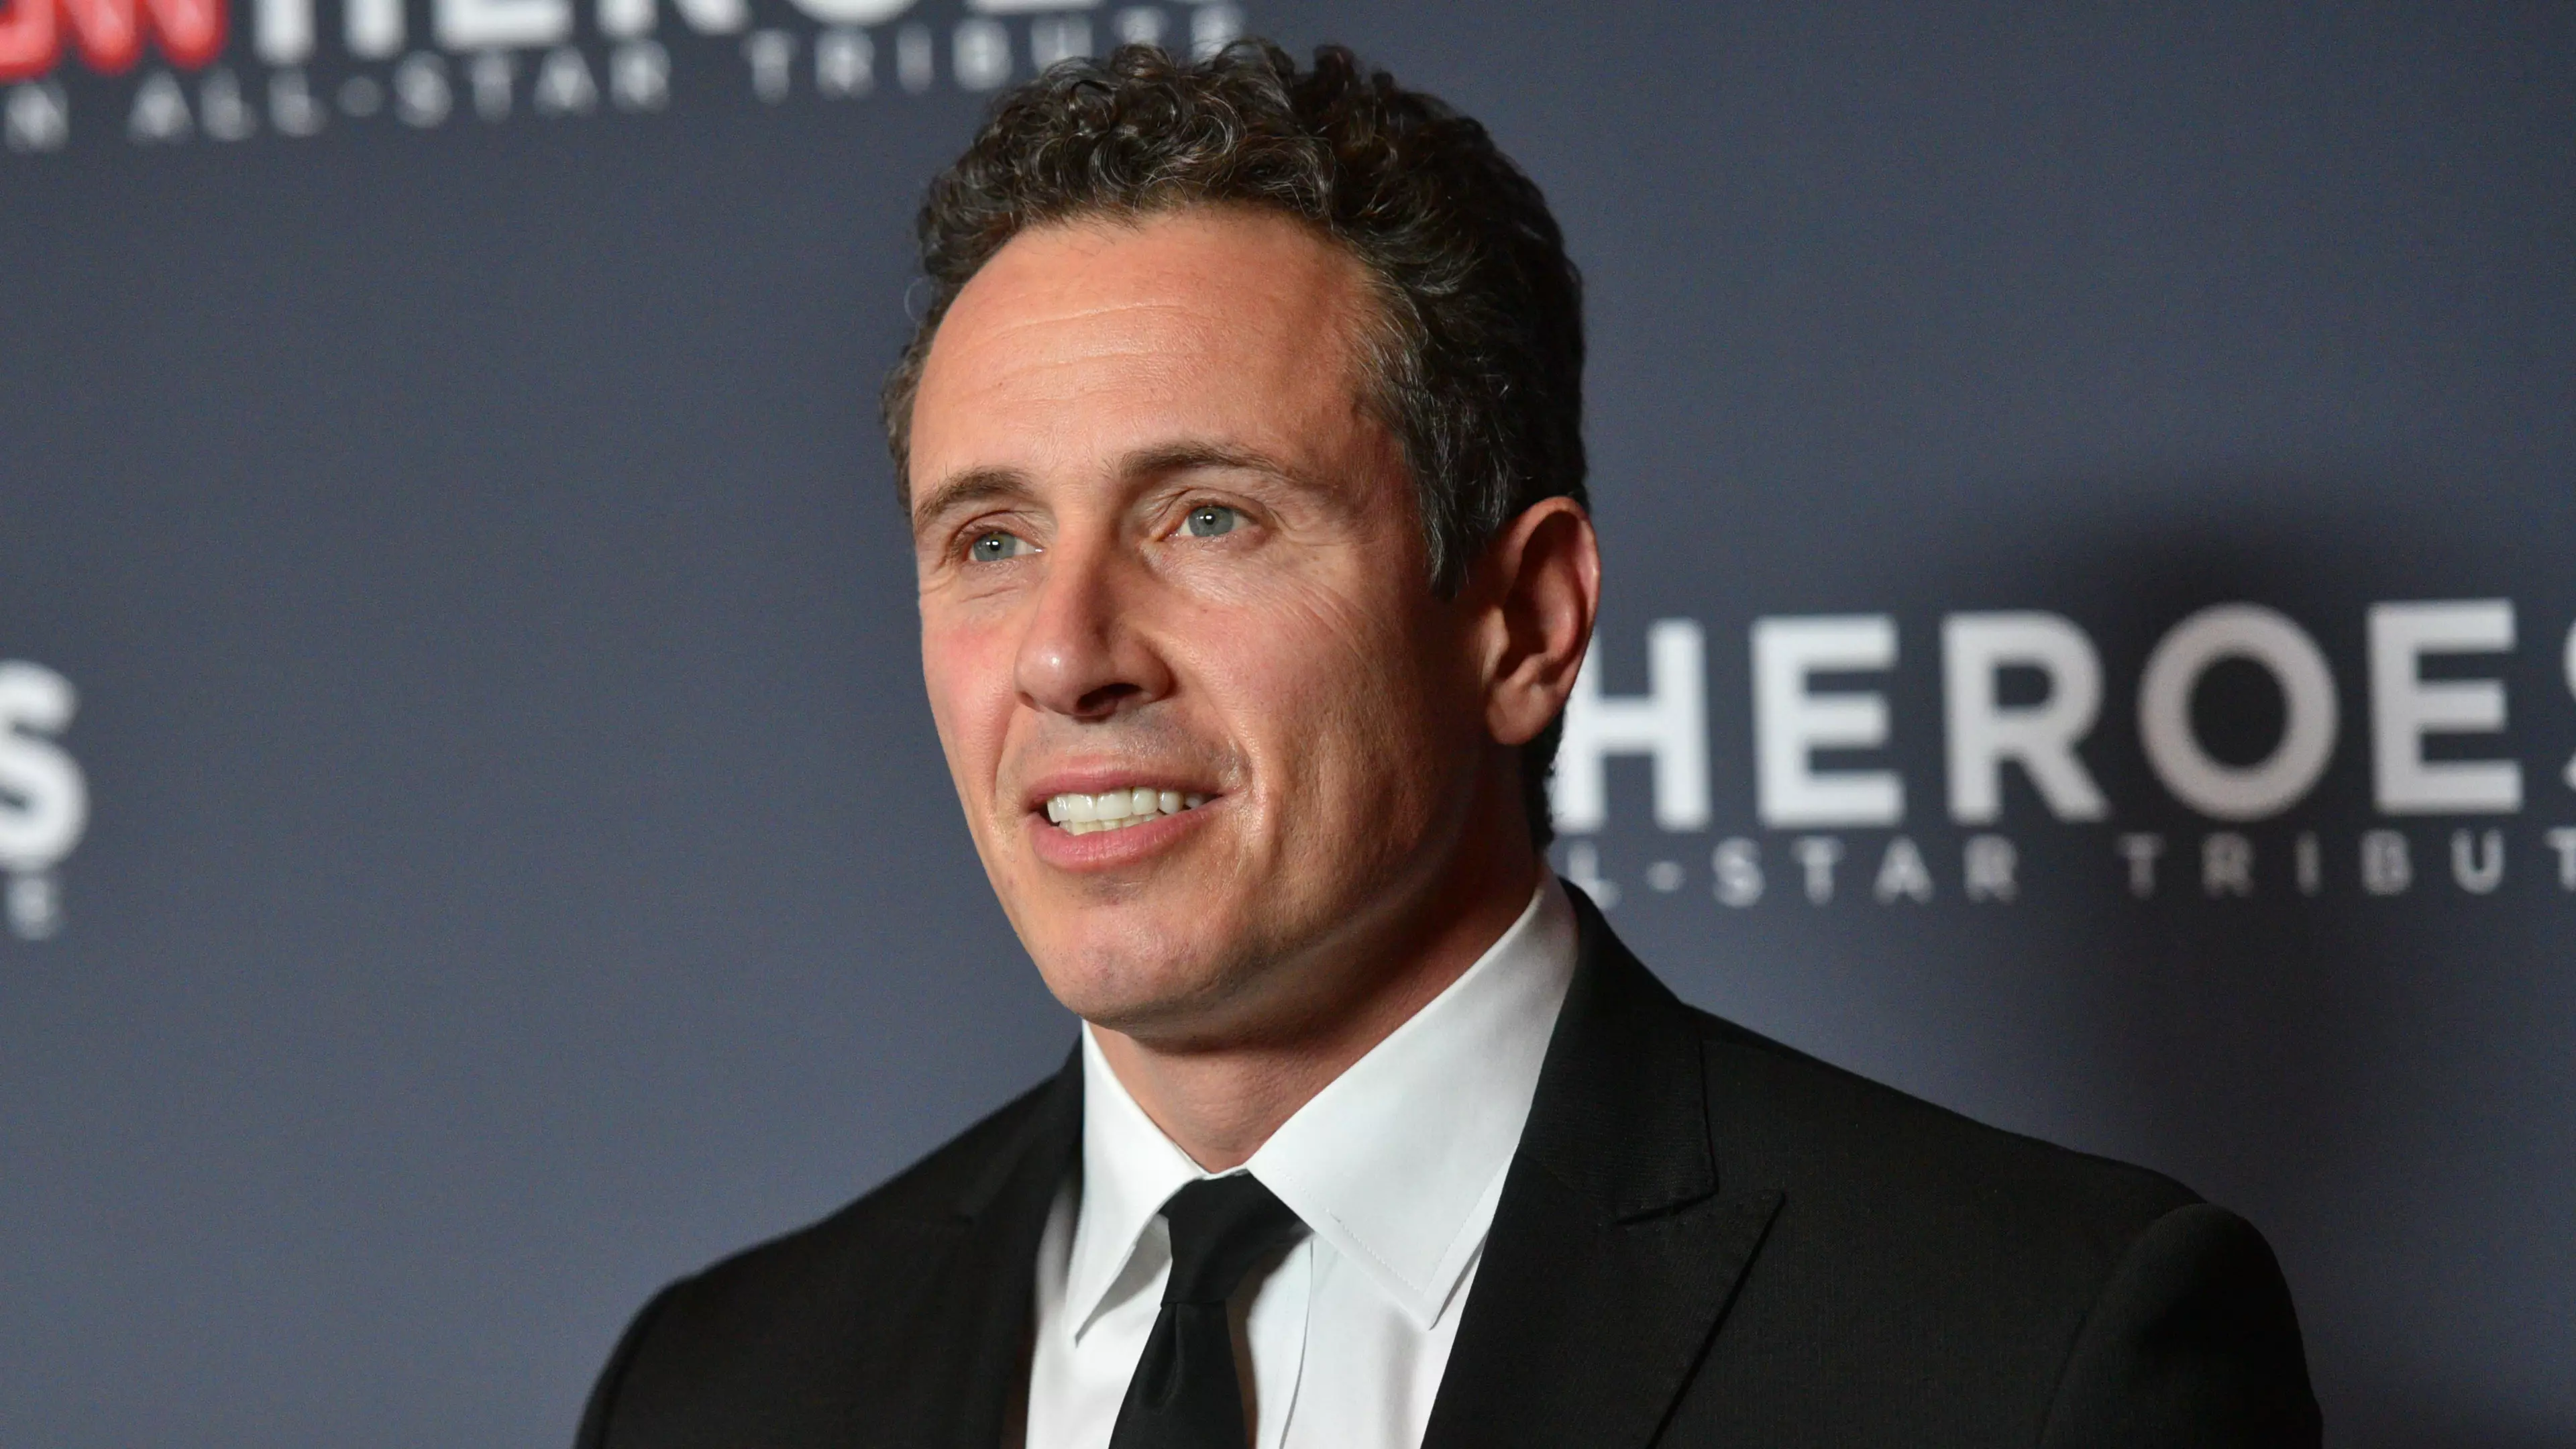 CNN Suspends Presenter Chris Cuomo 'Indefinitely' For Helping Brother Andrew